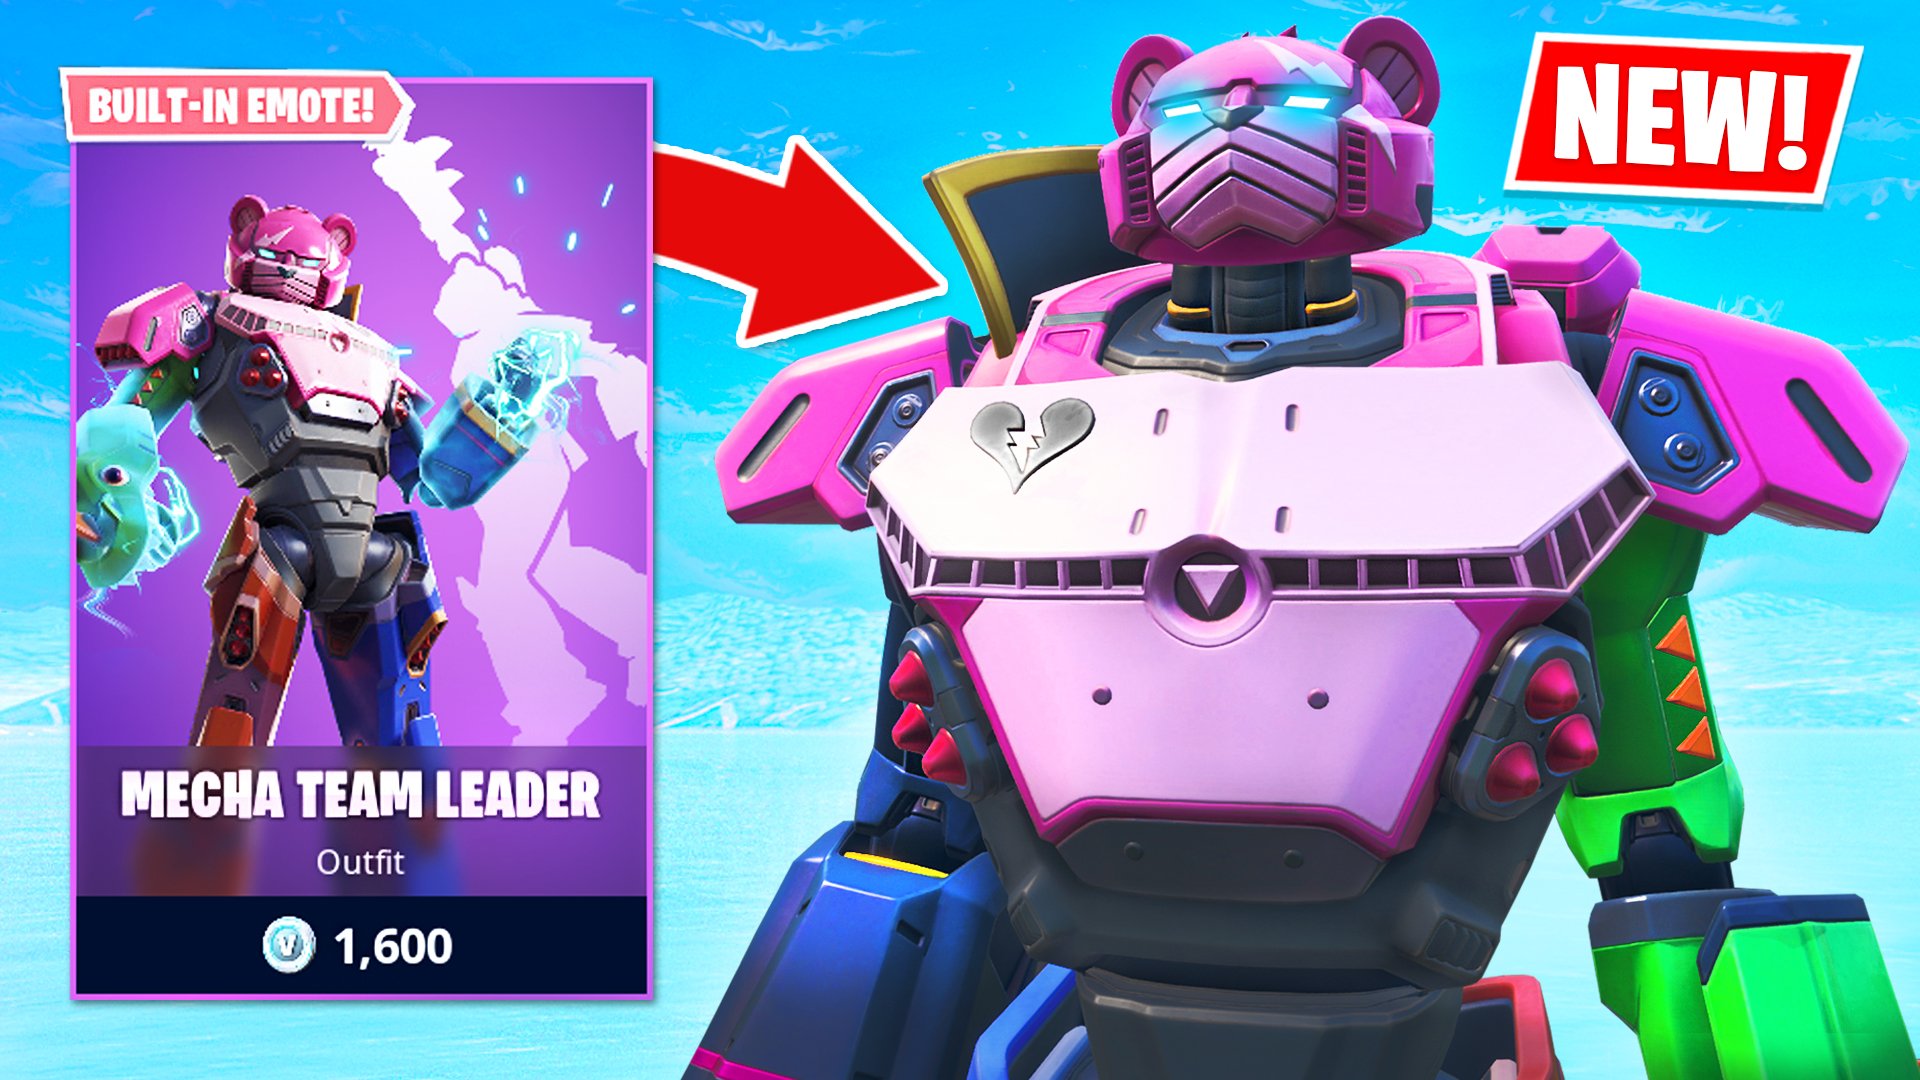 TG on "LIVE - https://t.co/e0ElpLio5g New Mecha Team Leader skin in Fortnite! know this week has been a bit Fortnite heavy but we're gonna continue Stranded &amp; Visage soon